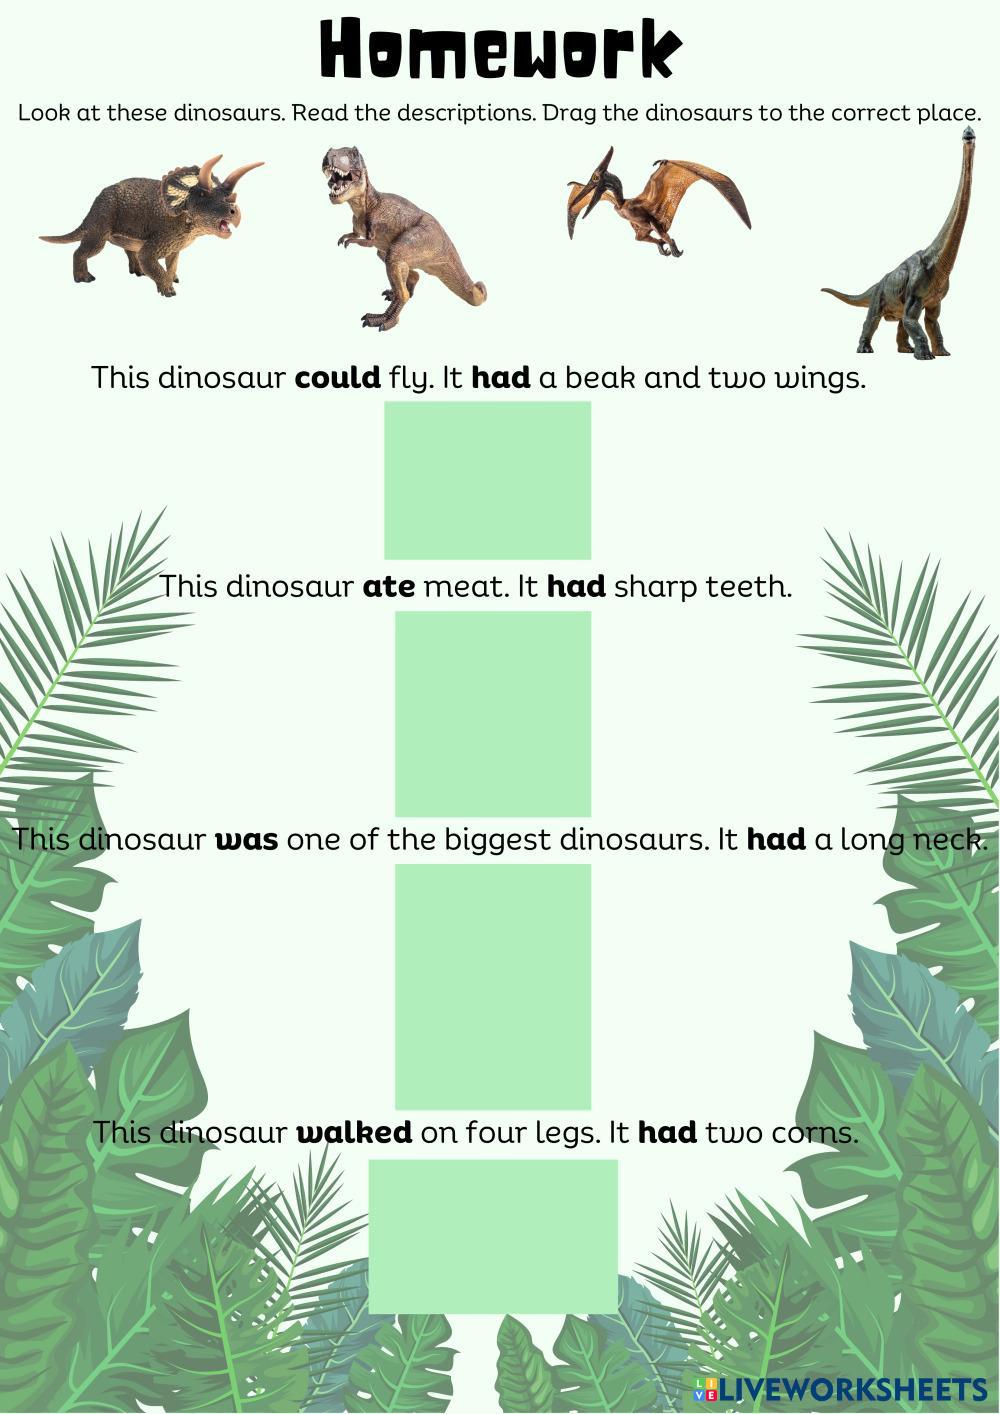 Guess the dinosaur | Live Worksheets